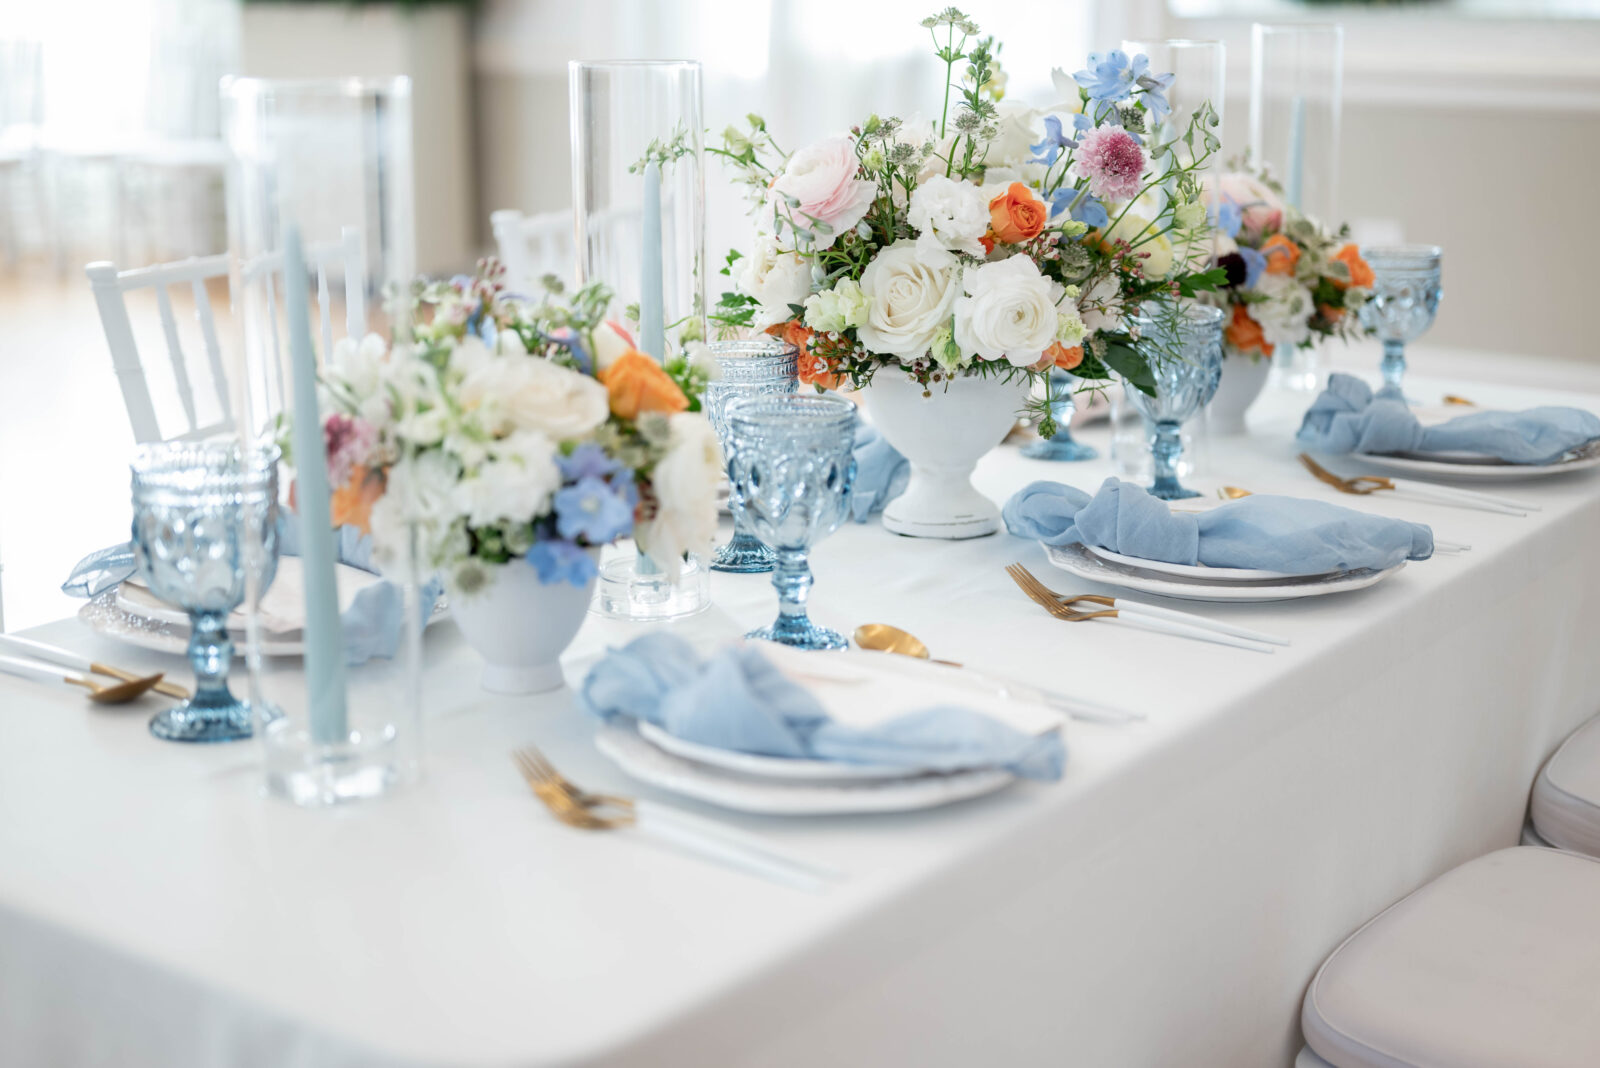 A Perfectly Pastel Kind of Love For This Spring Wedding Inspiration | Brontë Bride